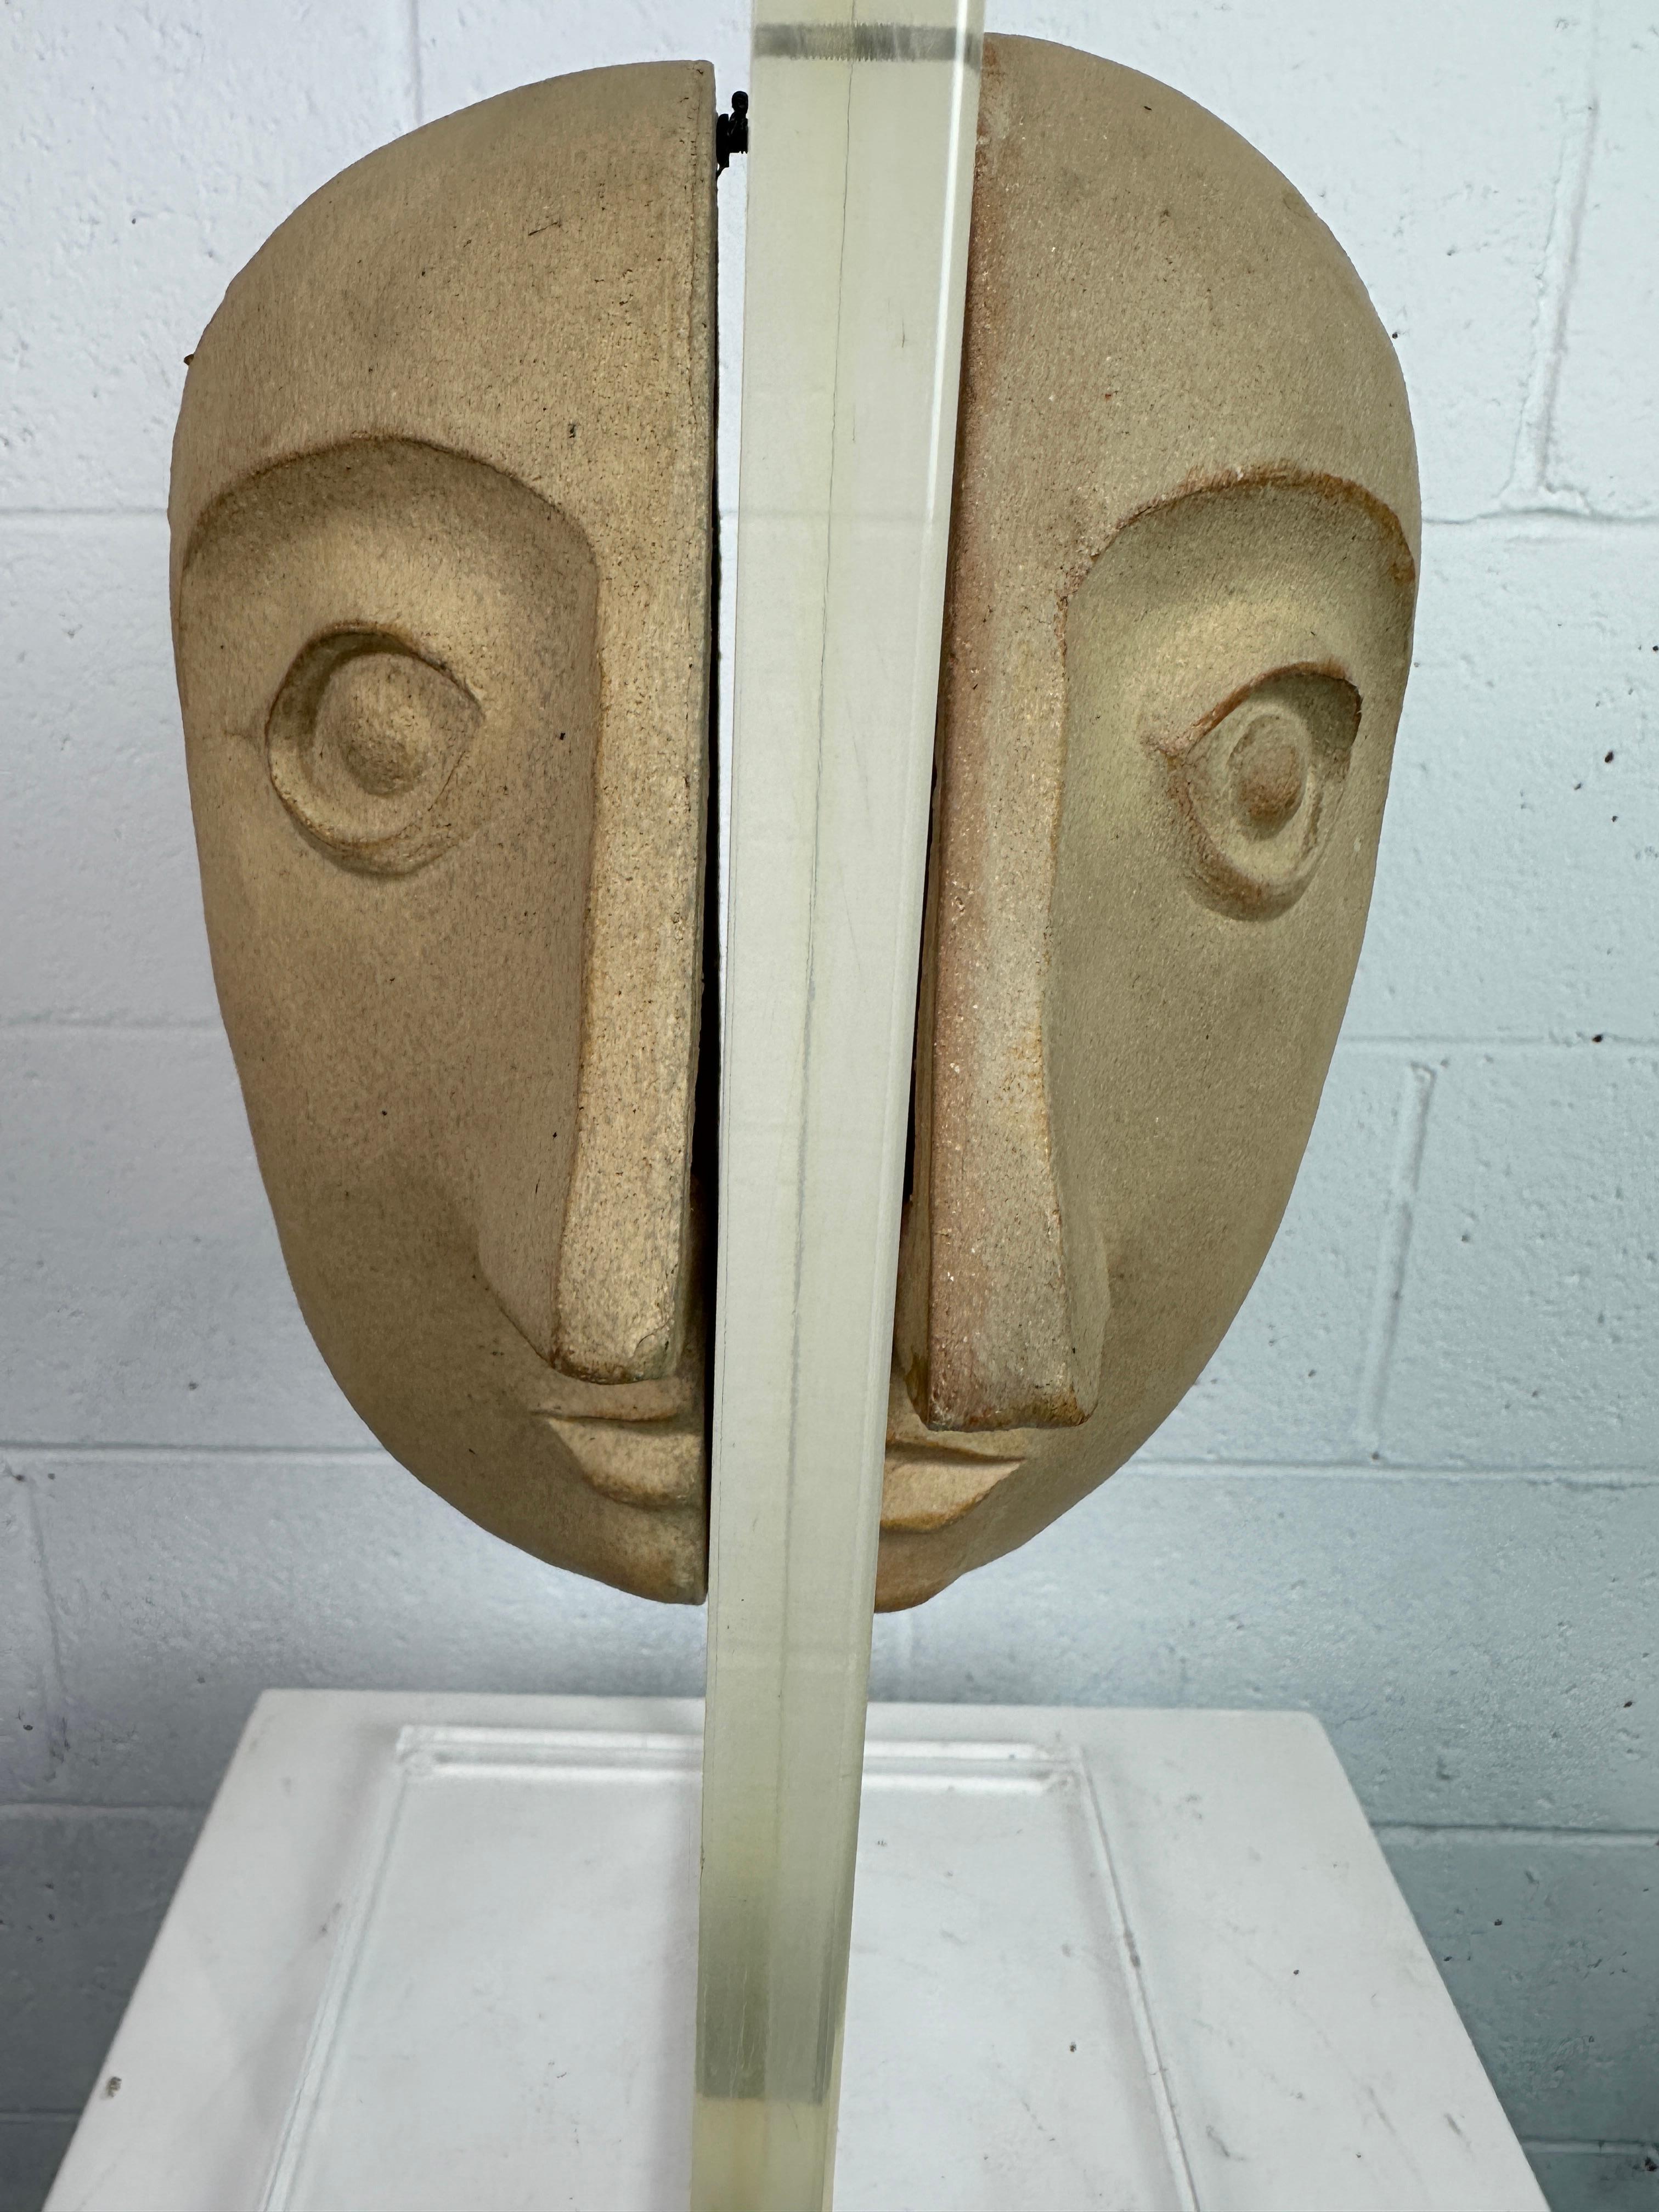 Introducing a semi-abstract stoneware sculpture created by artist David Gill for Bennington Potters. It features a head with imprinted numbers, made of two halves attached to a lucite stand.
 In the 1950s, Gill co-founded Bennington Potters with